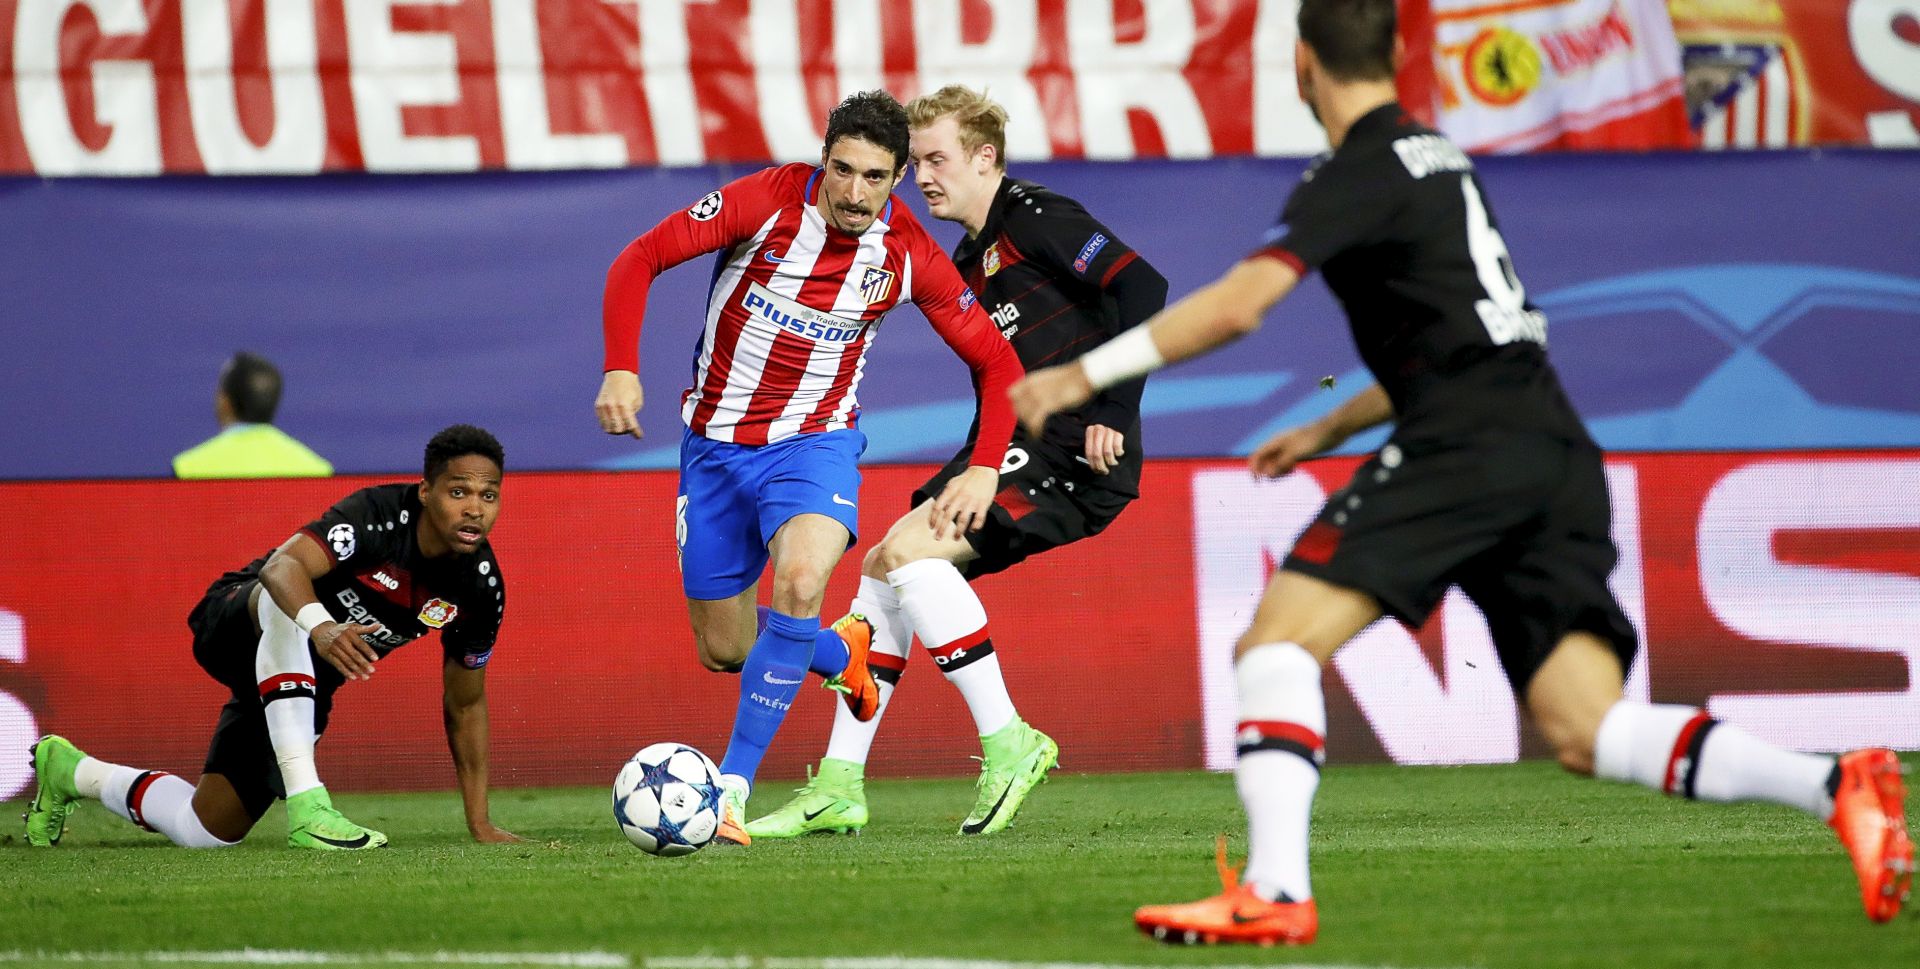 epa05850835 Atletico Madrid's Croatian defender Sime Vrsaljko (C-L) in action during the UEFA Champions League round of 16, second leg soccer match between Atletico Madrid and Bayer Leverkusen at Vicente Calderon stadium in Madrid, Spain, 15 March 2017.  EPA/JUANJO MARTIN